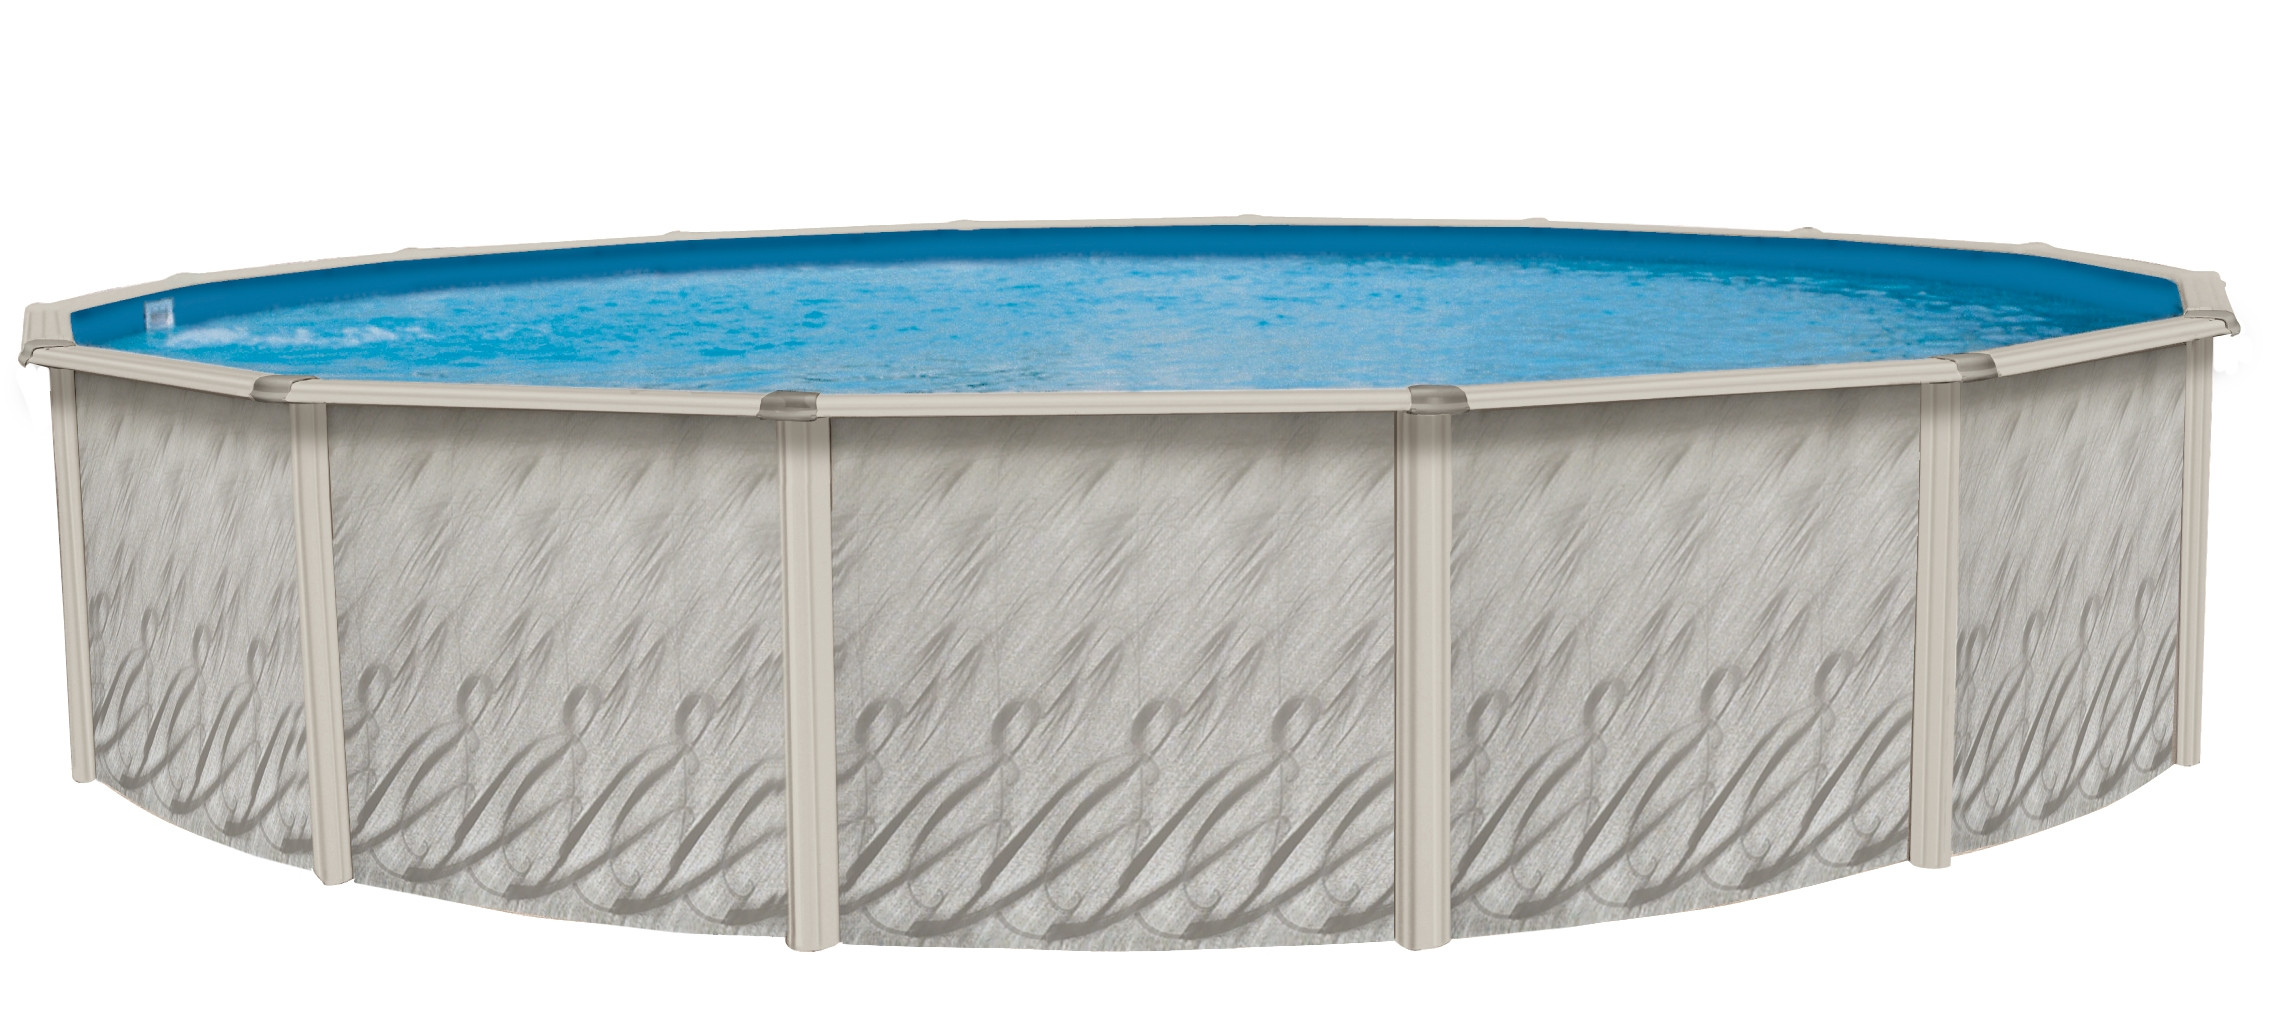 Coleman Above Ground Pool Skimmer
 Lake Effect™ 30 Round x 52" Meadows Reprieve Swimming